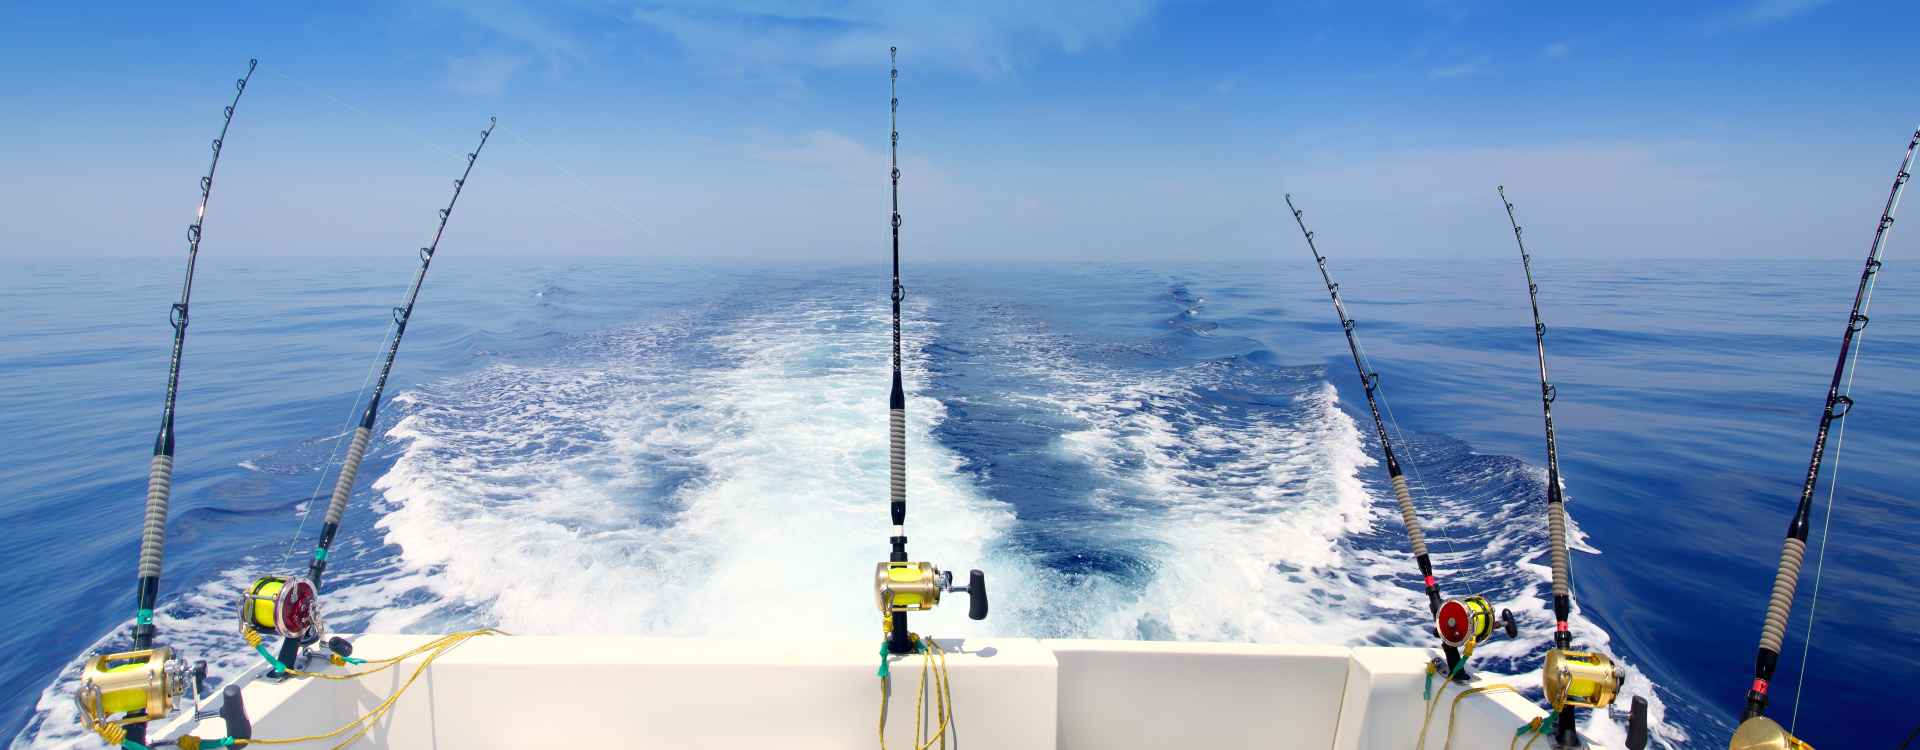 Sportfishing Tour in Ixtapa Zihuatanejo Mexico | Pacific Tours Ixtapa. Offshore and Inshore Fishing is where these fishing charters can take you to. All of our fishing boats depart from Zihuatanejo Main Dock. Ixtapa Sport fishing Boats has a excellent captains and the most reasonable prices for you to enjoy fishing with your family